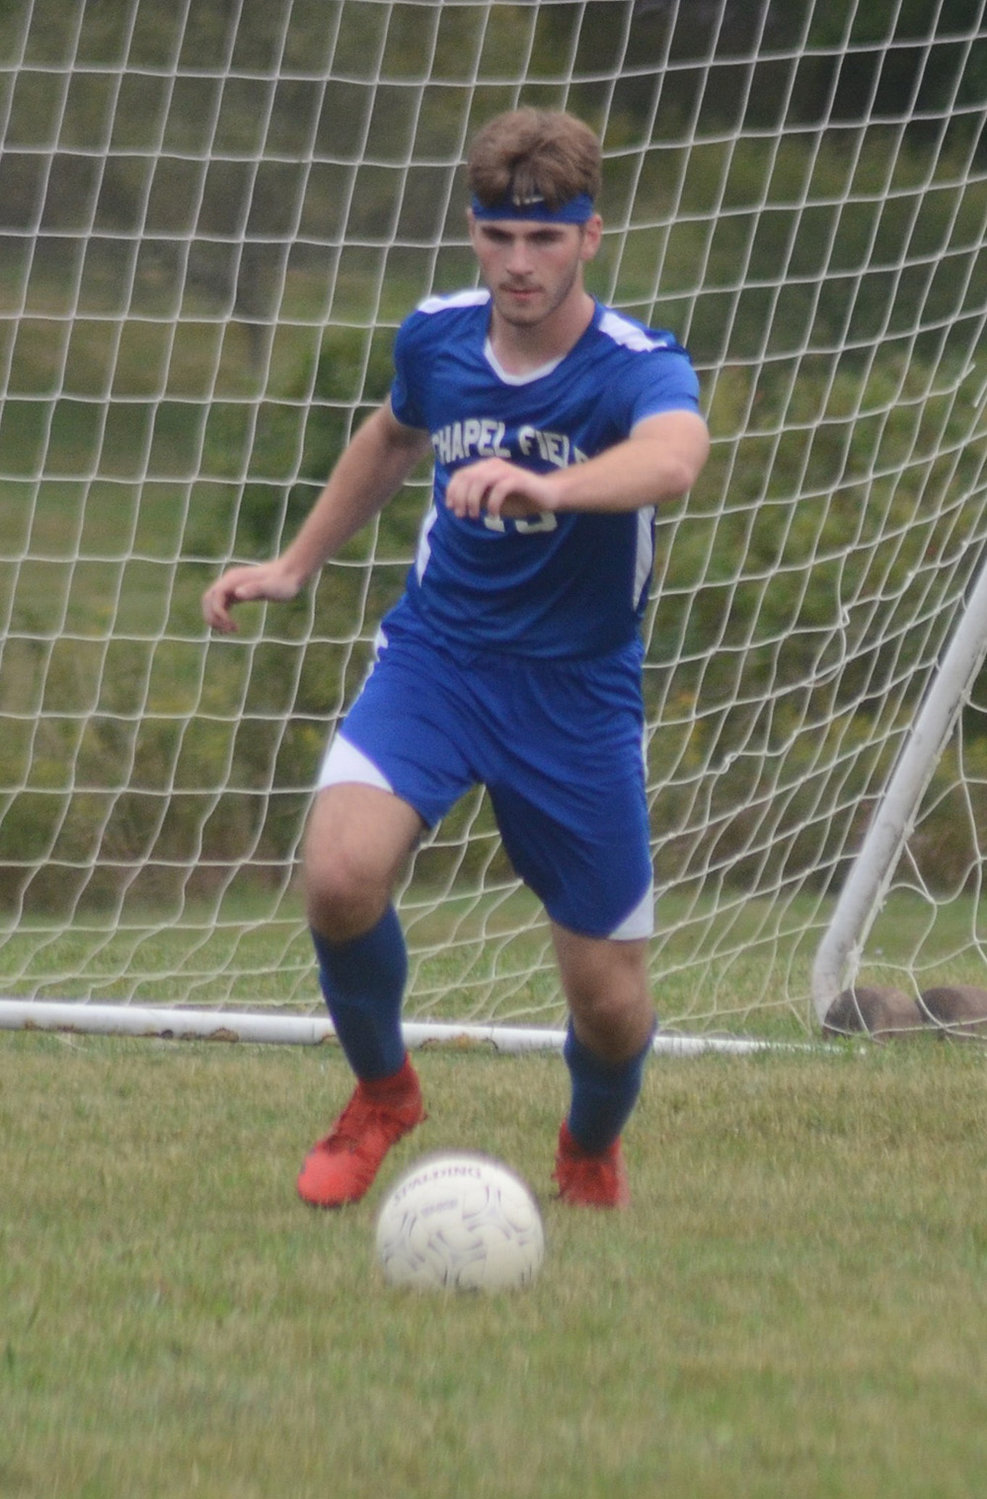 Chapel Field’s Michael Bonagura prepares to send the ball down the field during Wednesday’s non-league boys’ soccer game at Chapel Field Christian School in Pine Bush.